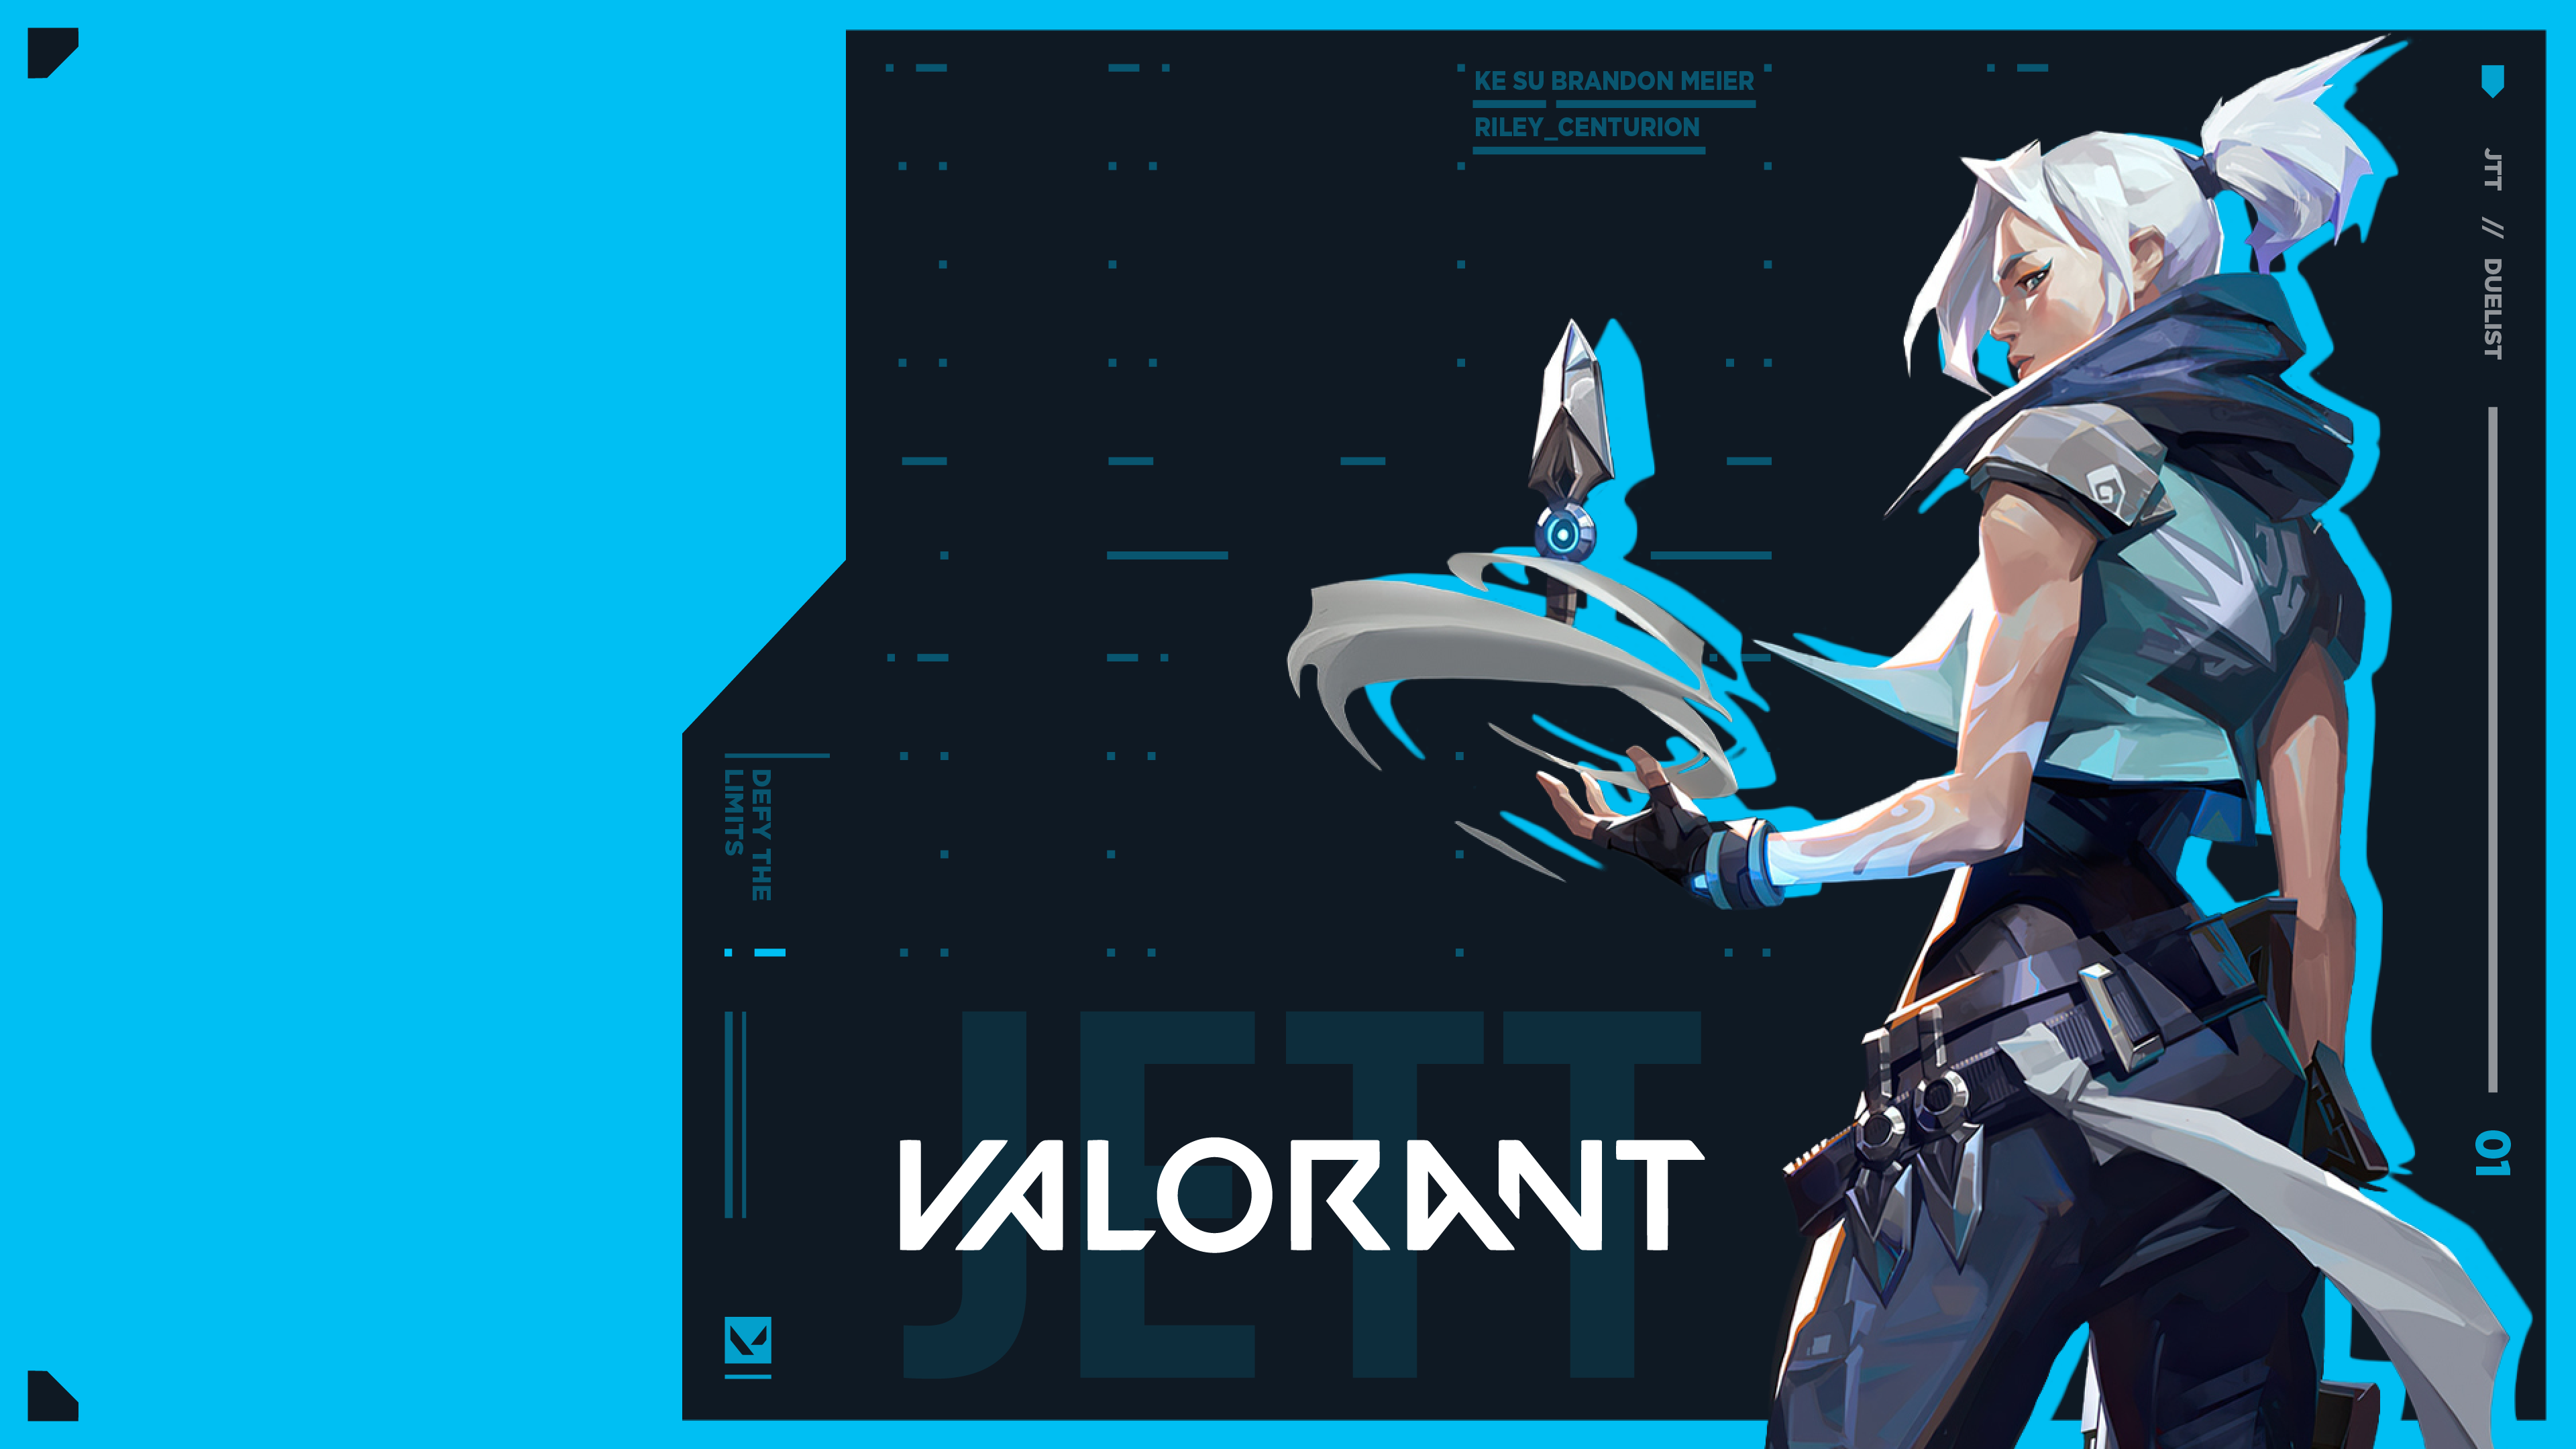 VALORANT: 13 HD wallpapers for PC - Off topic - Valorant